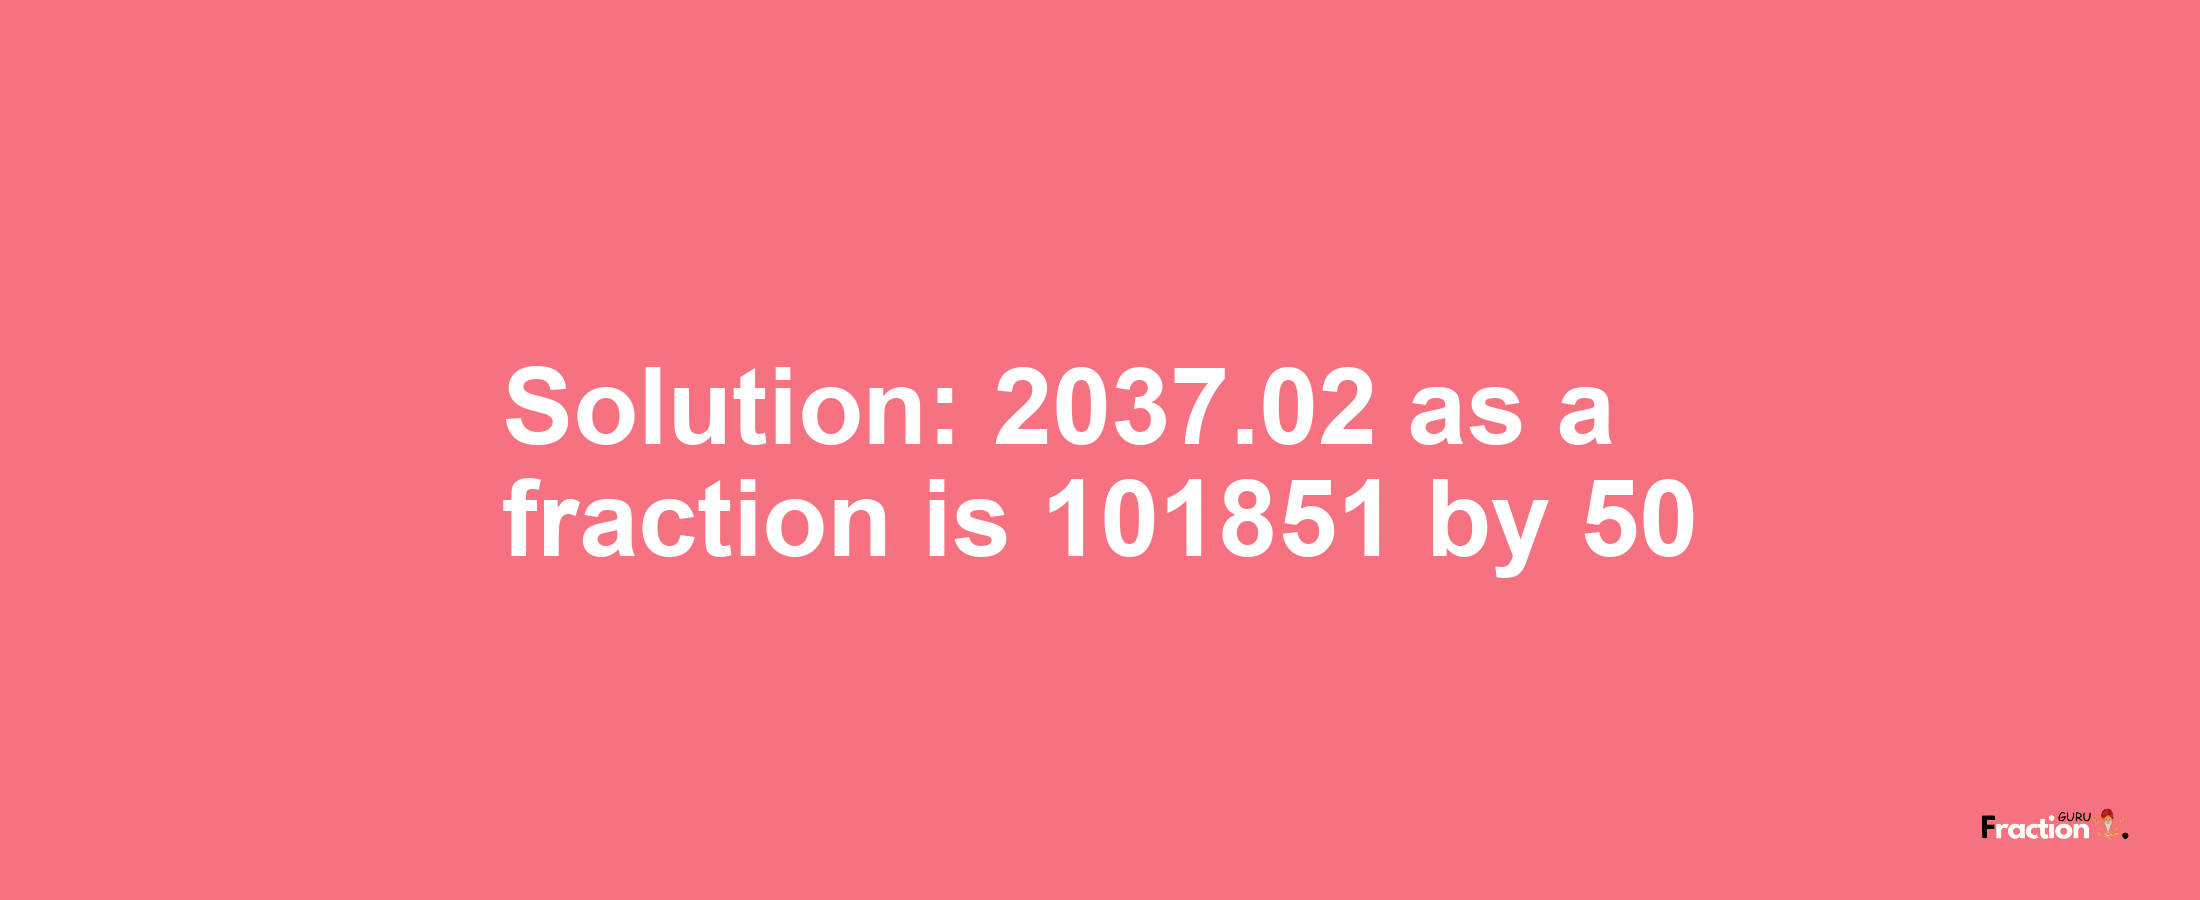 Solution:2037.02 as a fraction is 101851/50